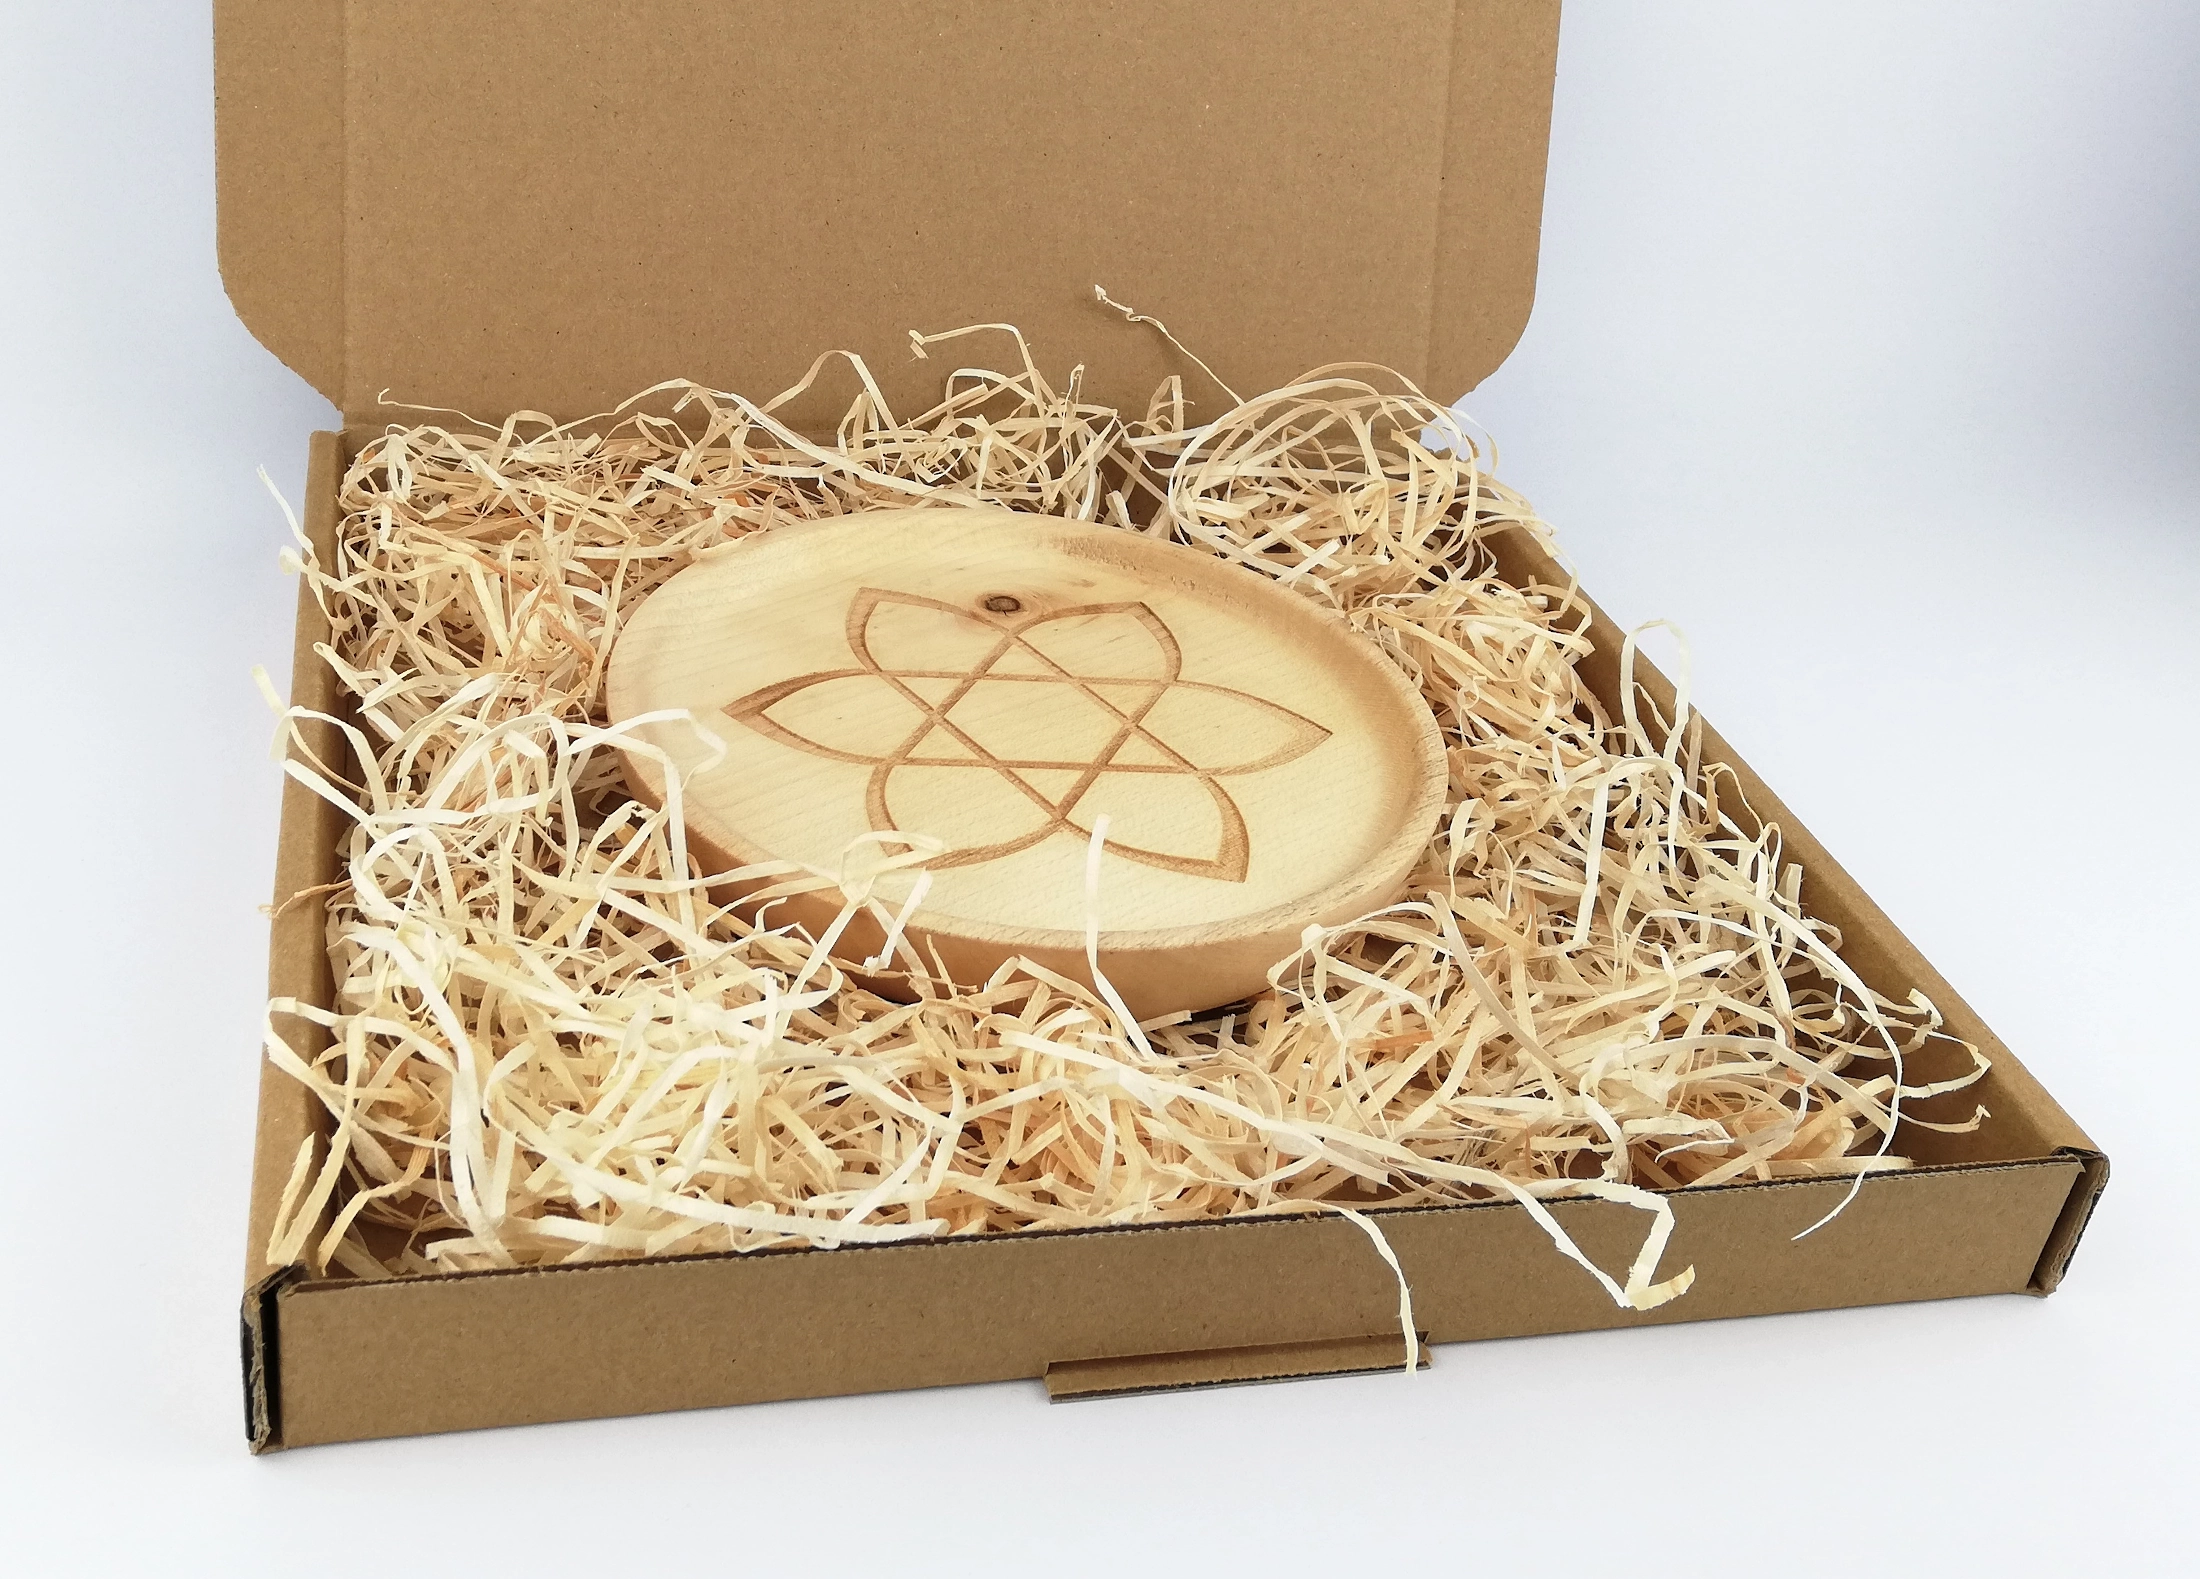 Hexagram (version 1) on a small plate (16cm/6.3in in diameter), packed in a box.